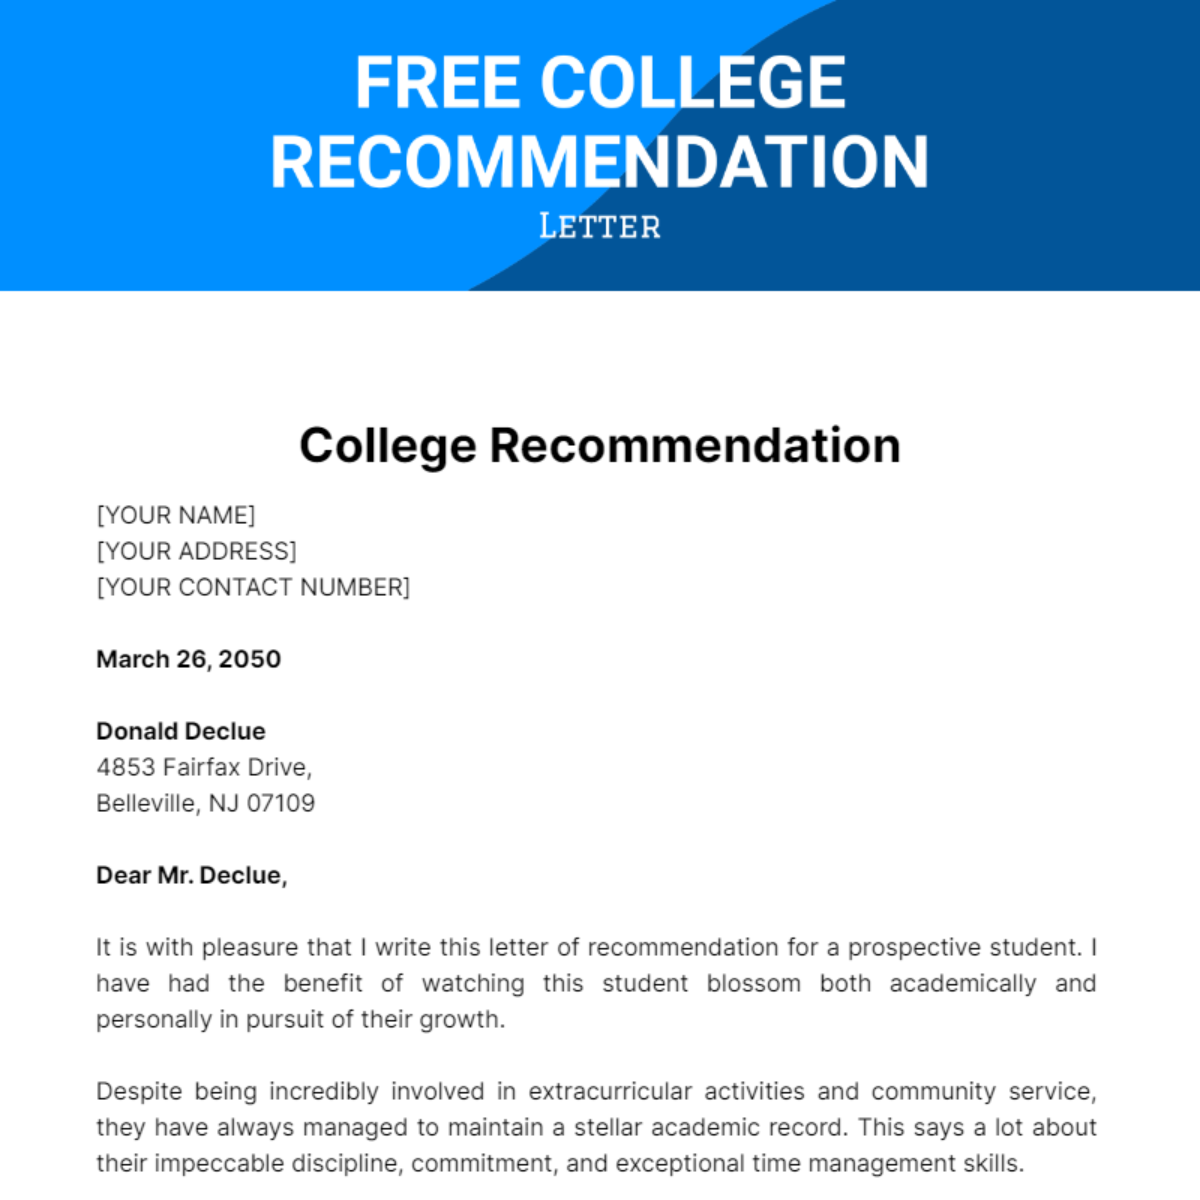 College Recommendation Letter template